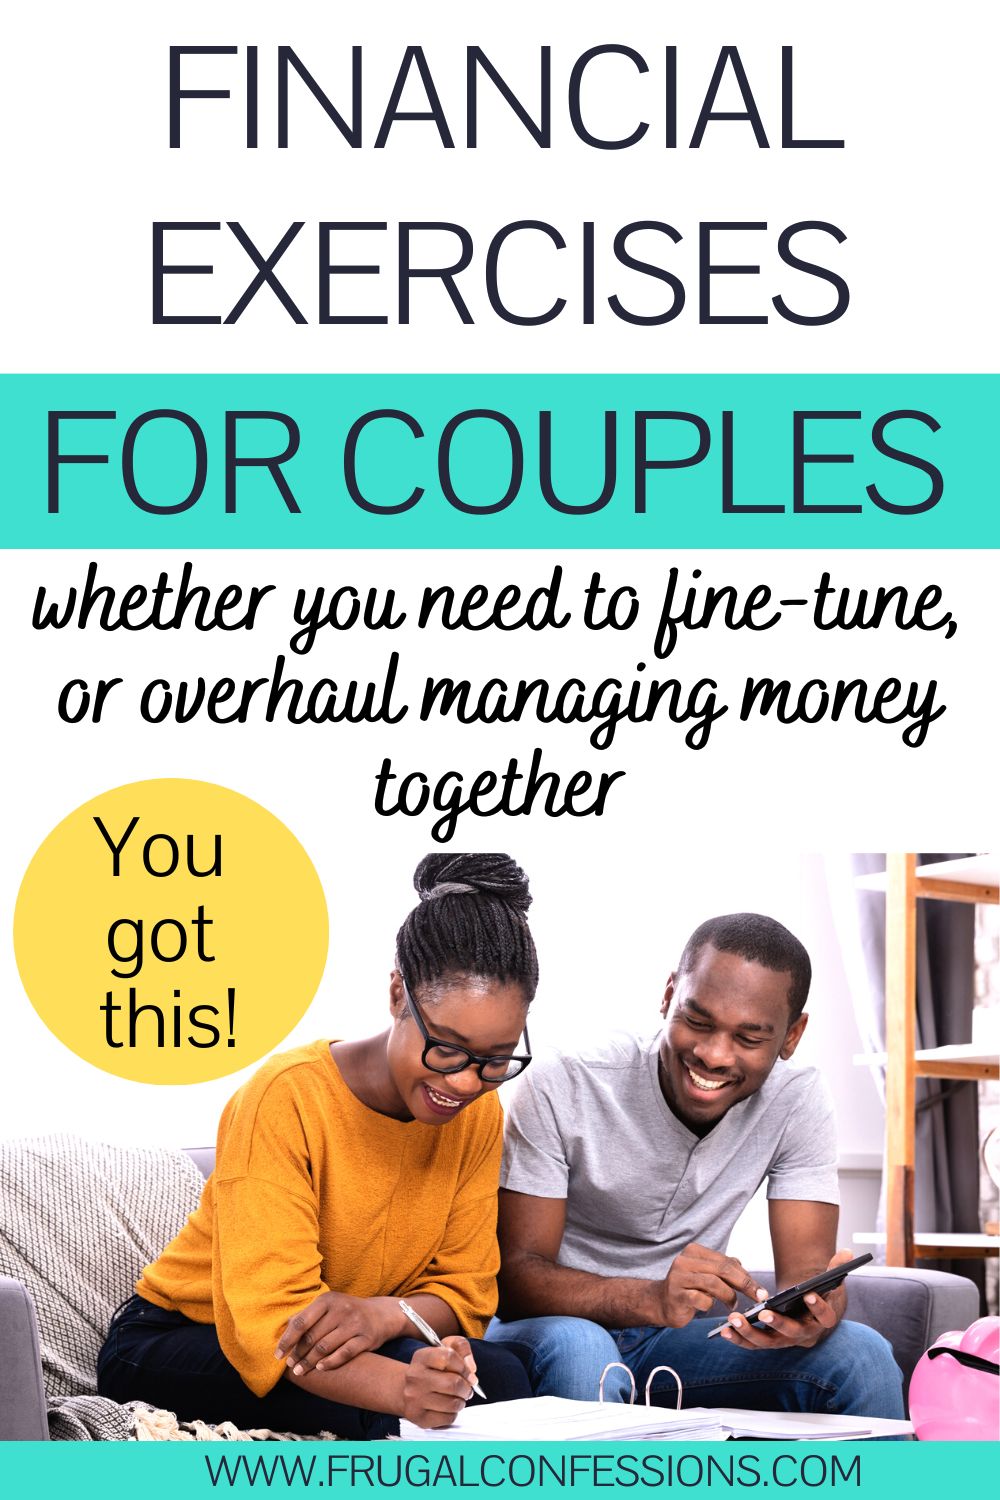 couple smiling on couch working on finances, text overlay "financial exercises for couples"